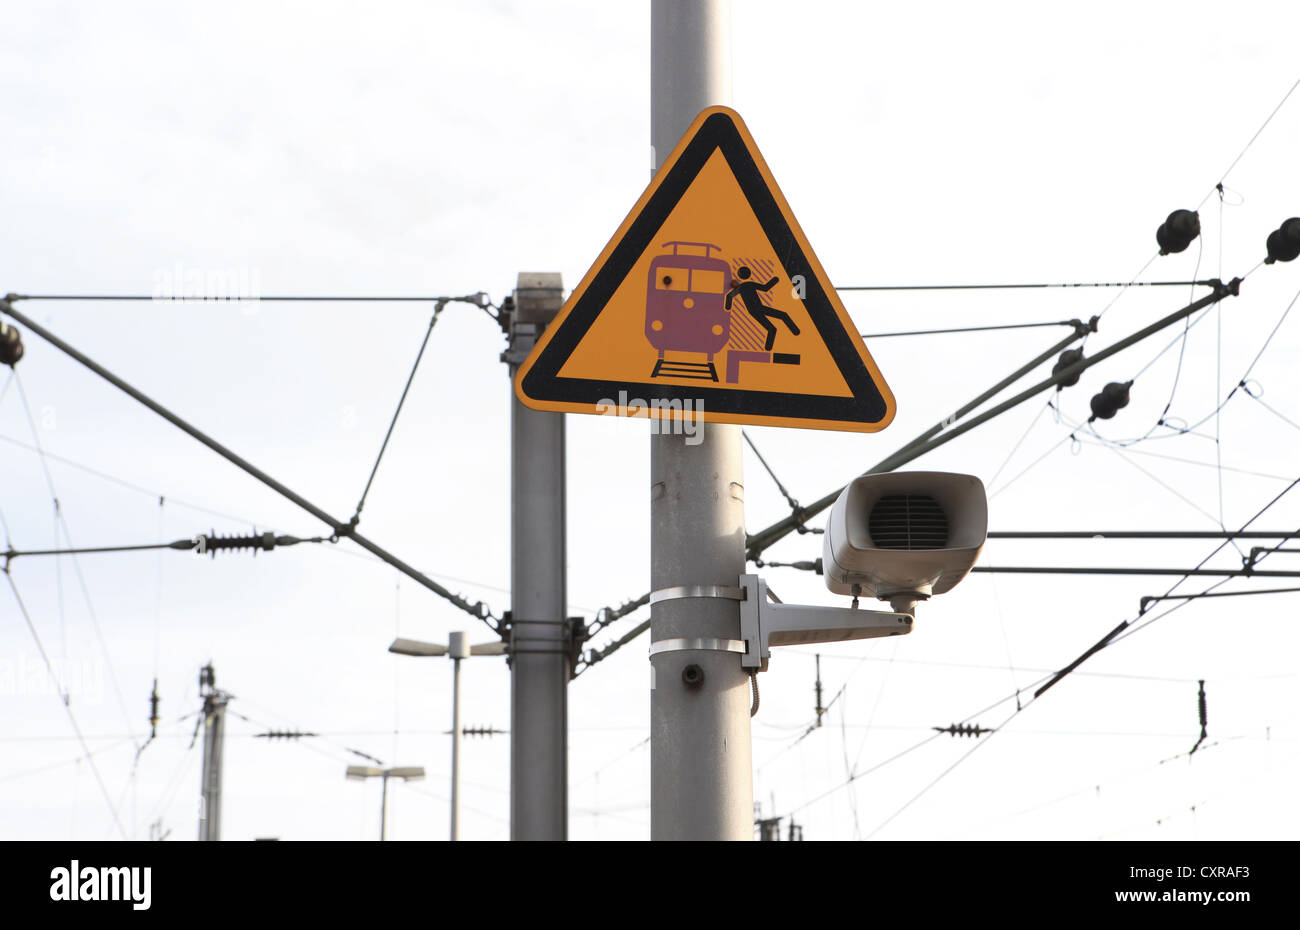 Speaker, overhead lines and a warning sign on a railway station Stock Photo